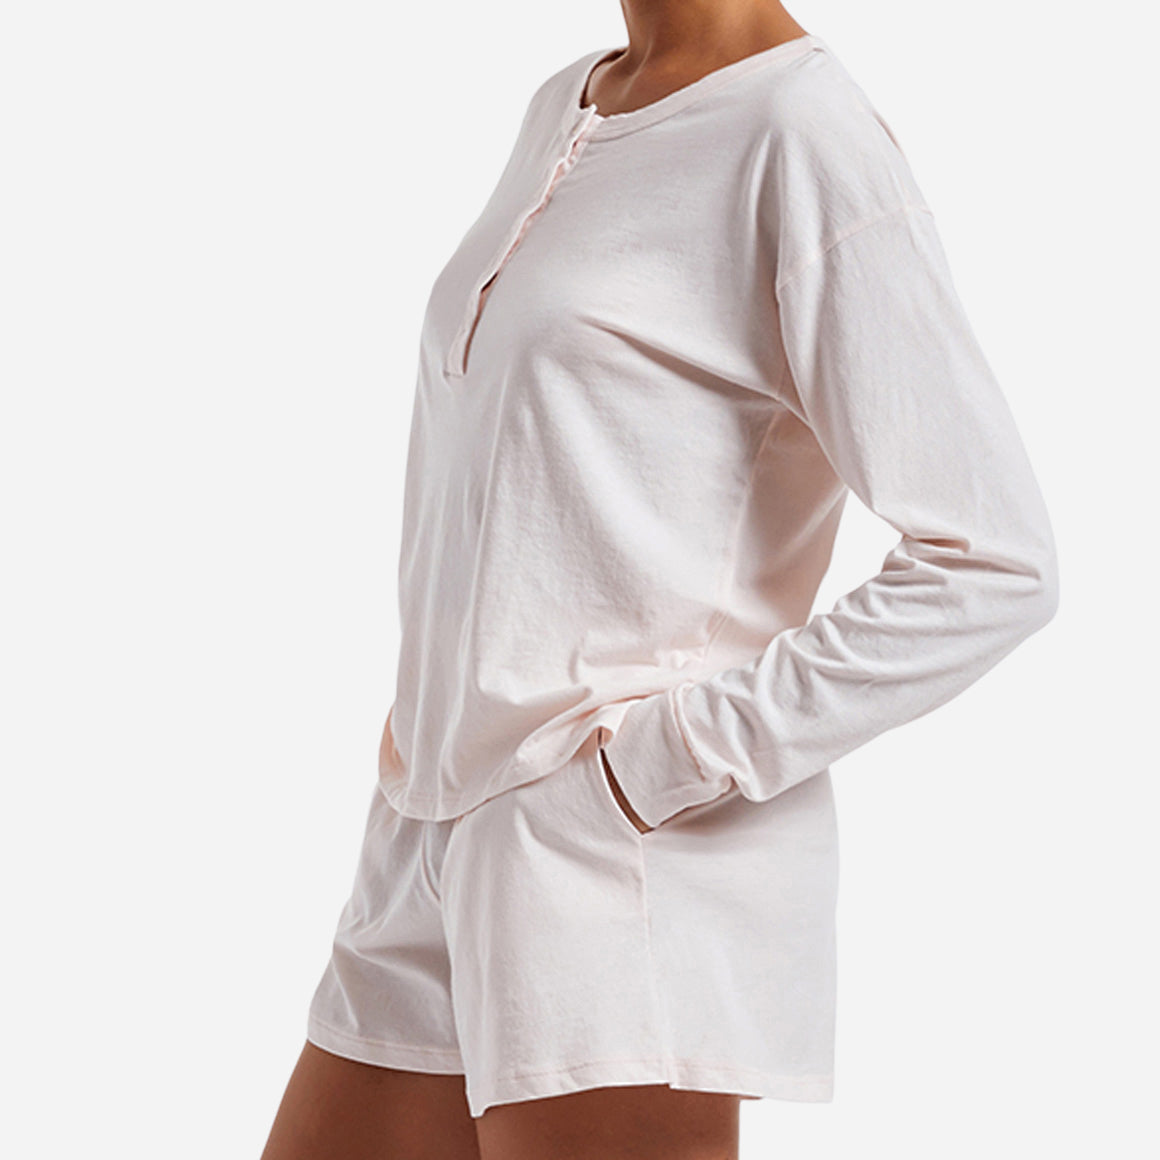 The design of the Chloe PJ Set is as elegant as it is versatile. The classic long sleeve henley shirt features a relaxed fit and a flattering neckline. The cozy shorts offer a comfortable, yet flattering silhouette, with side seam pockets and an elastic waistband ensuring a personalized fit for all body types.